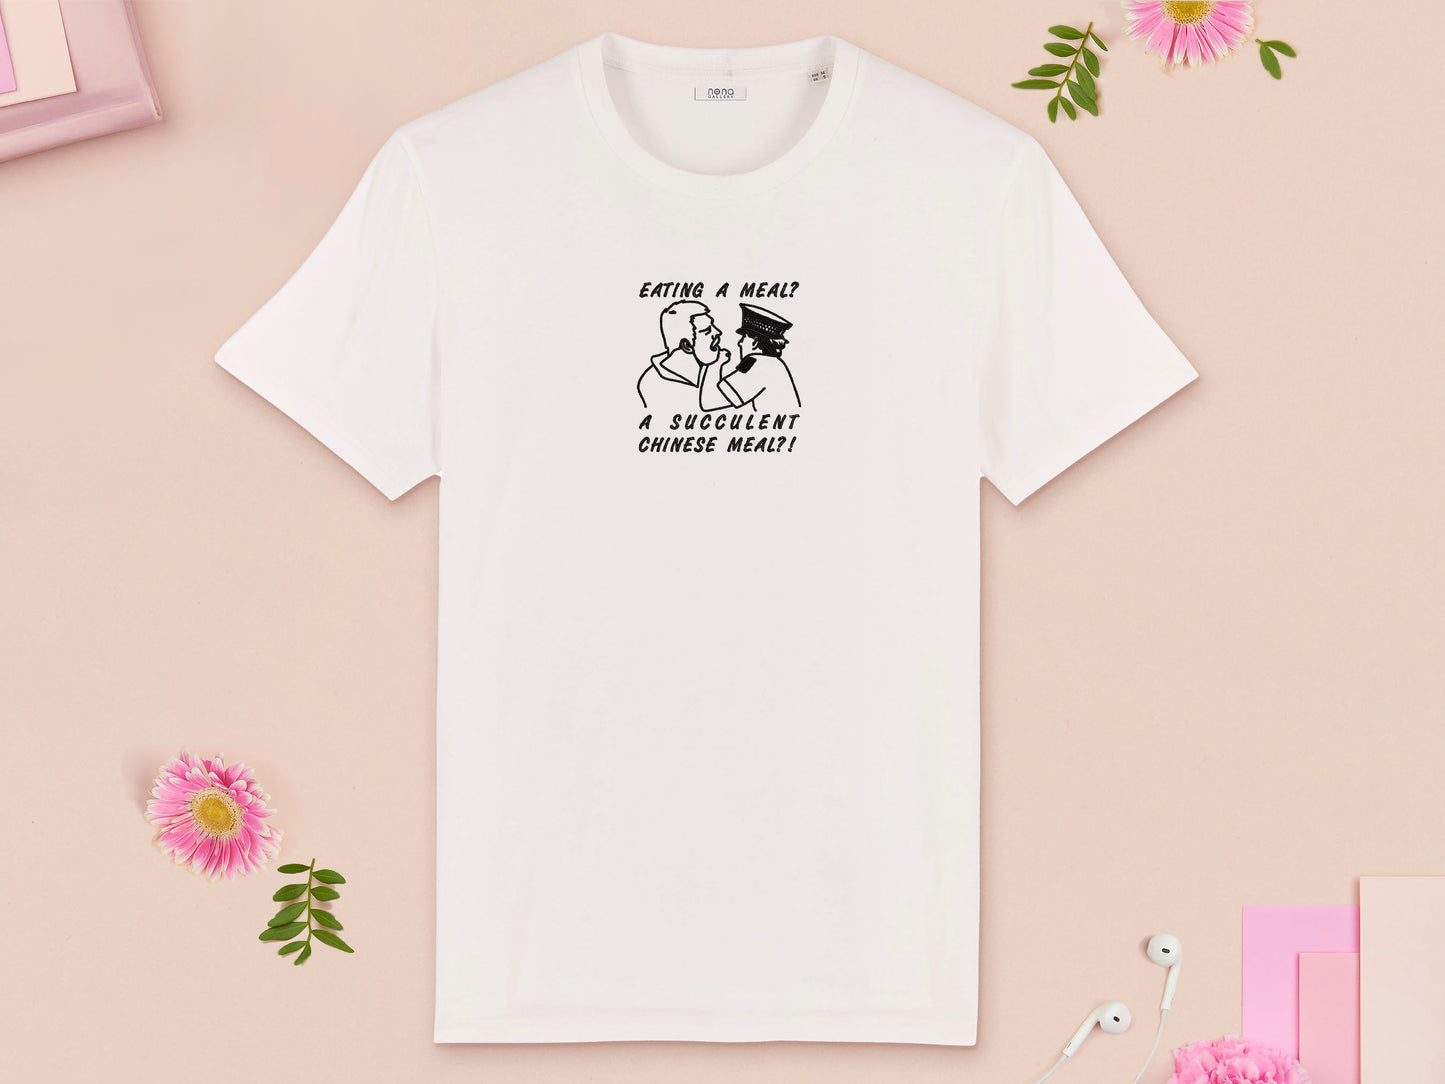 A white crew neck short sleeve t-shirt, with an embroidered black thread design of the viral democracy manifest video of Charles Dozsa being arrested by a policeman with the text reading Eating A Meal? A Succulent Chinese Meal?!